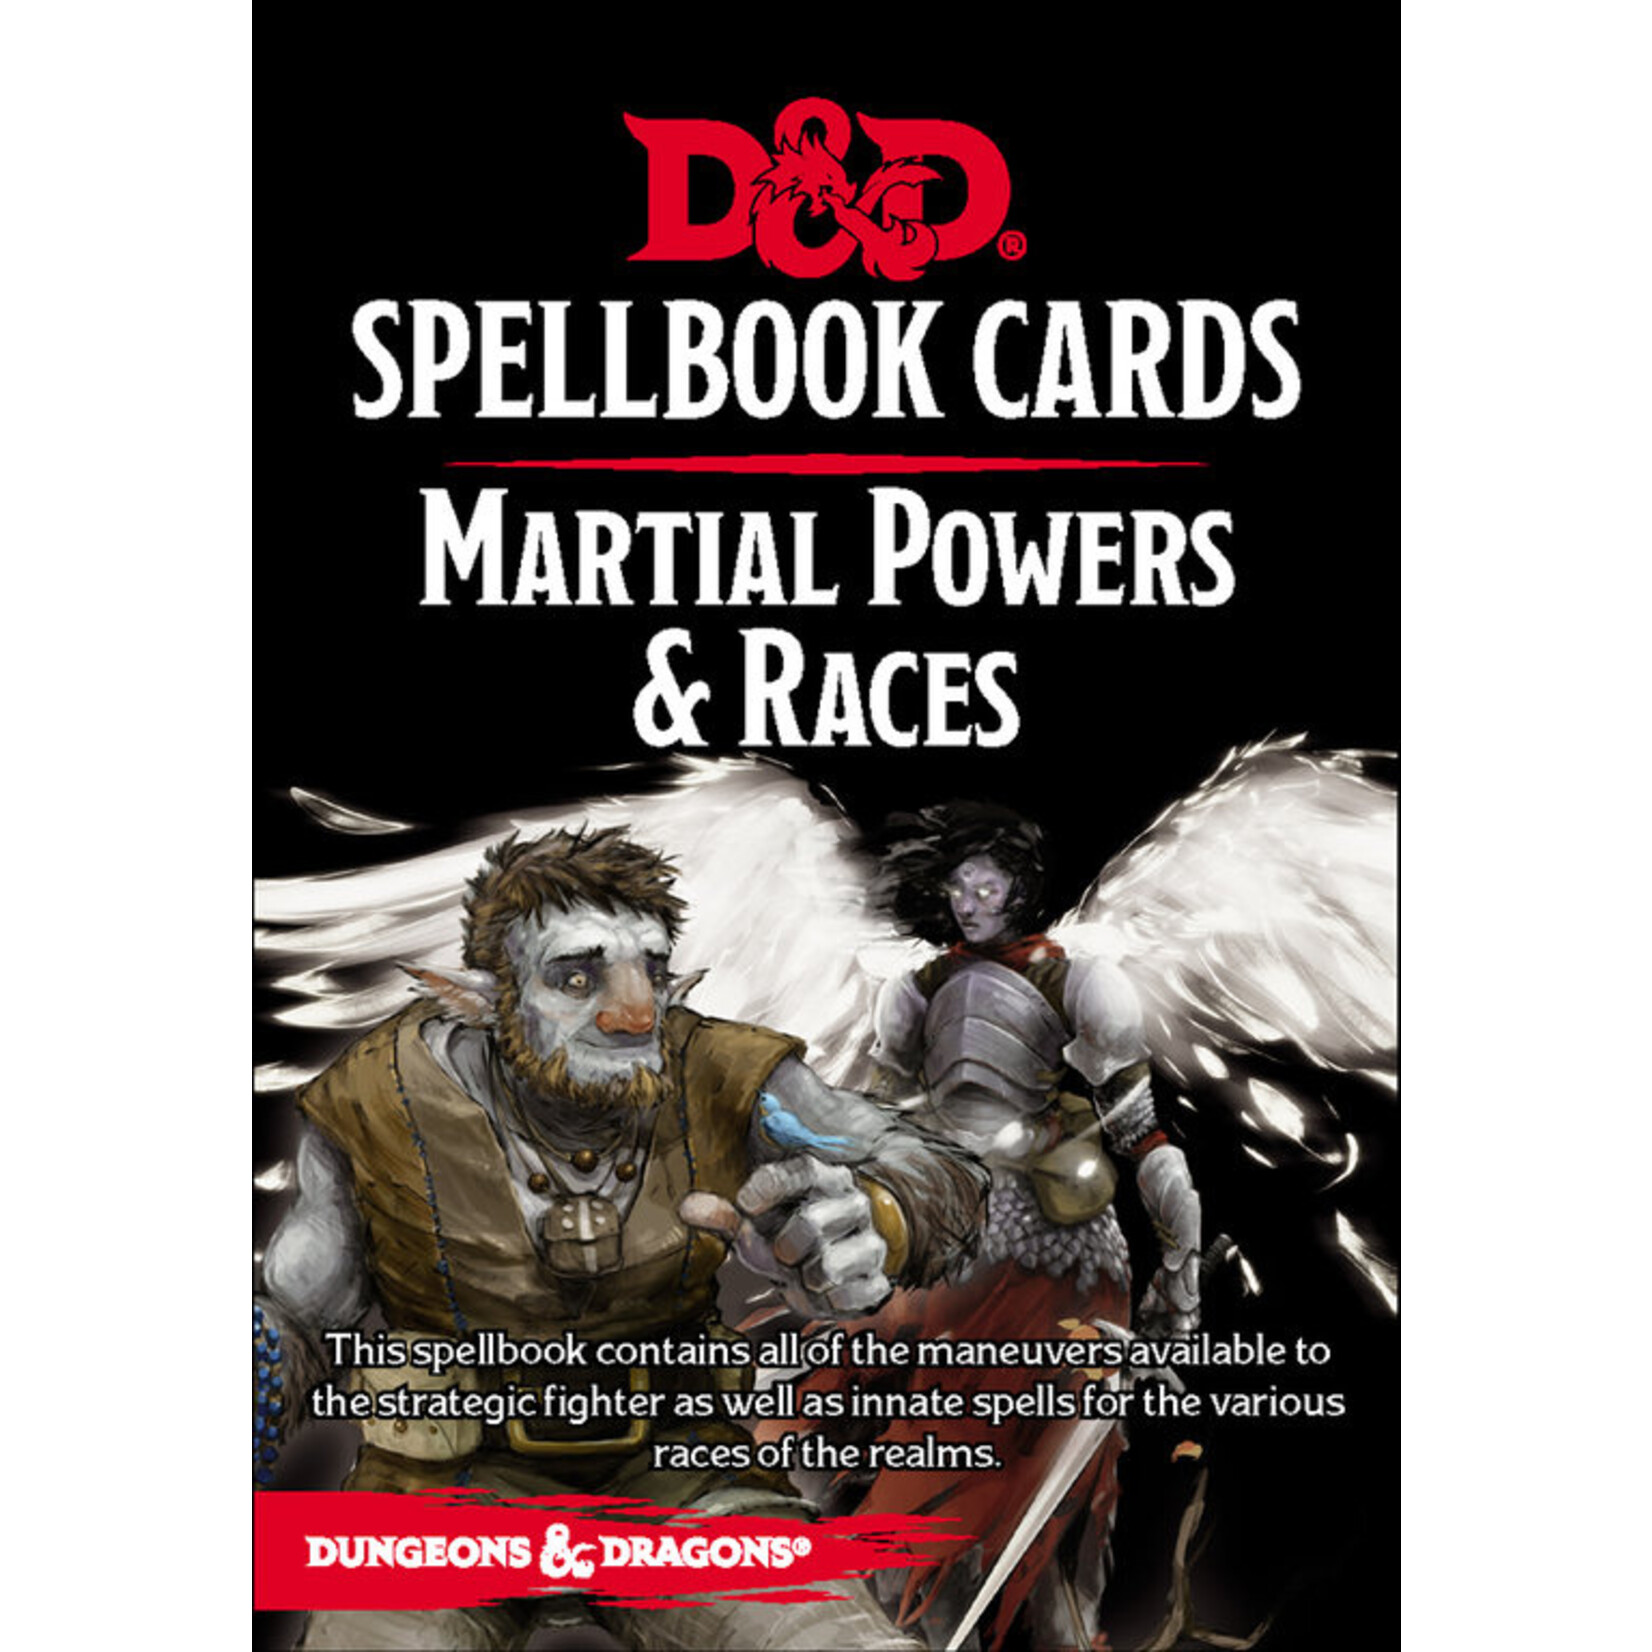 wizards of the coast Dungeons & Dragons: Spellbook cards - Martial Powers & Races